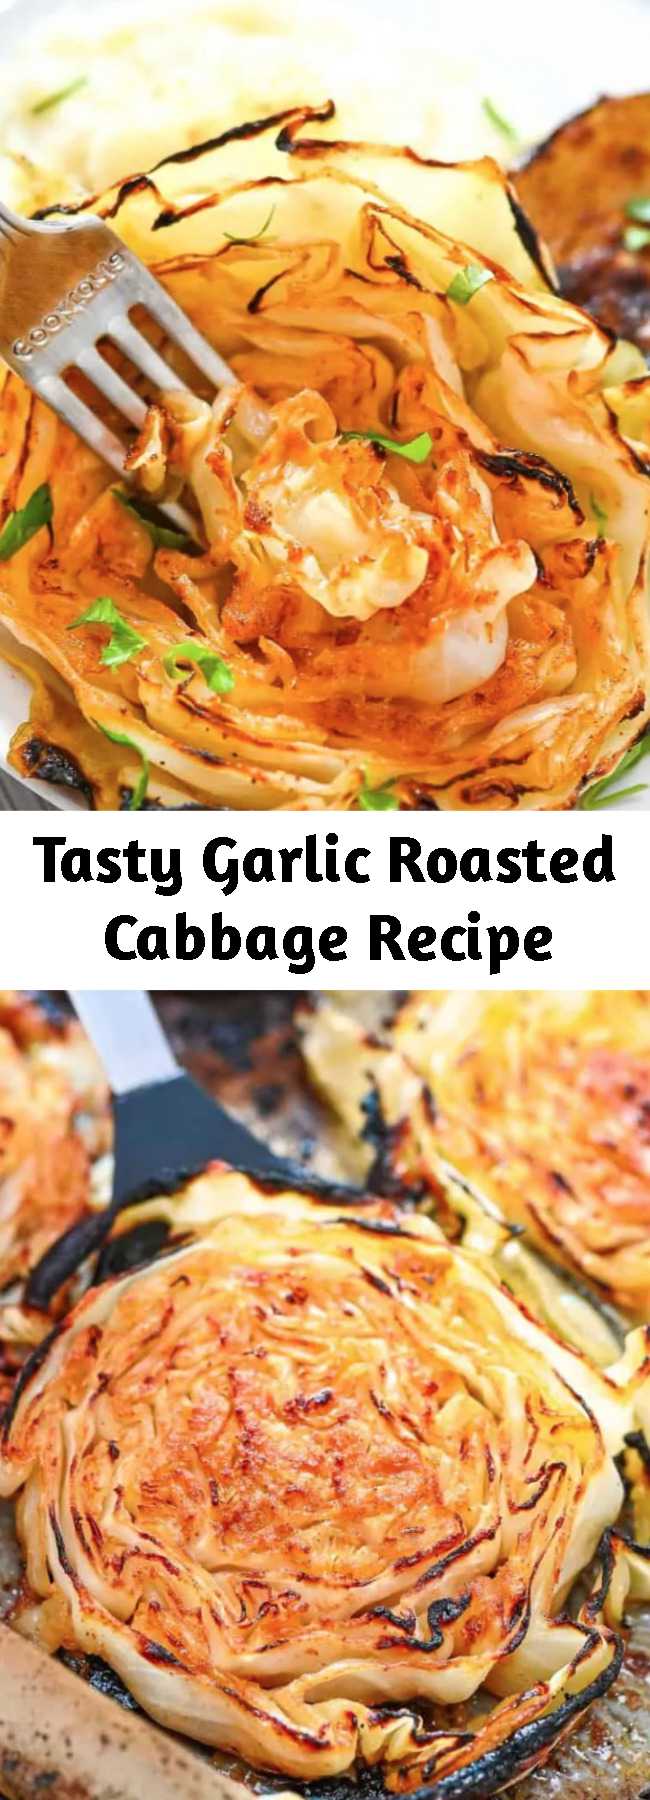 Tasty Garlic Roasted Cabbage Recipe - This Garlic Roasted Cabbage is such a tasty vegan dish. Savory with a light char, you’re going to love these delicious flavors and textures. #cabbage #dinner #vegan #plantbased #vegetarian